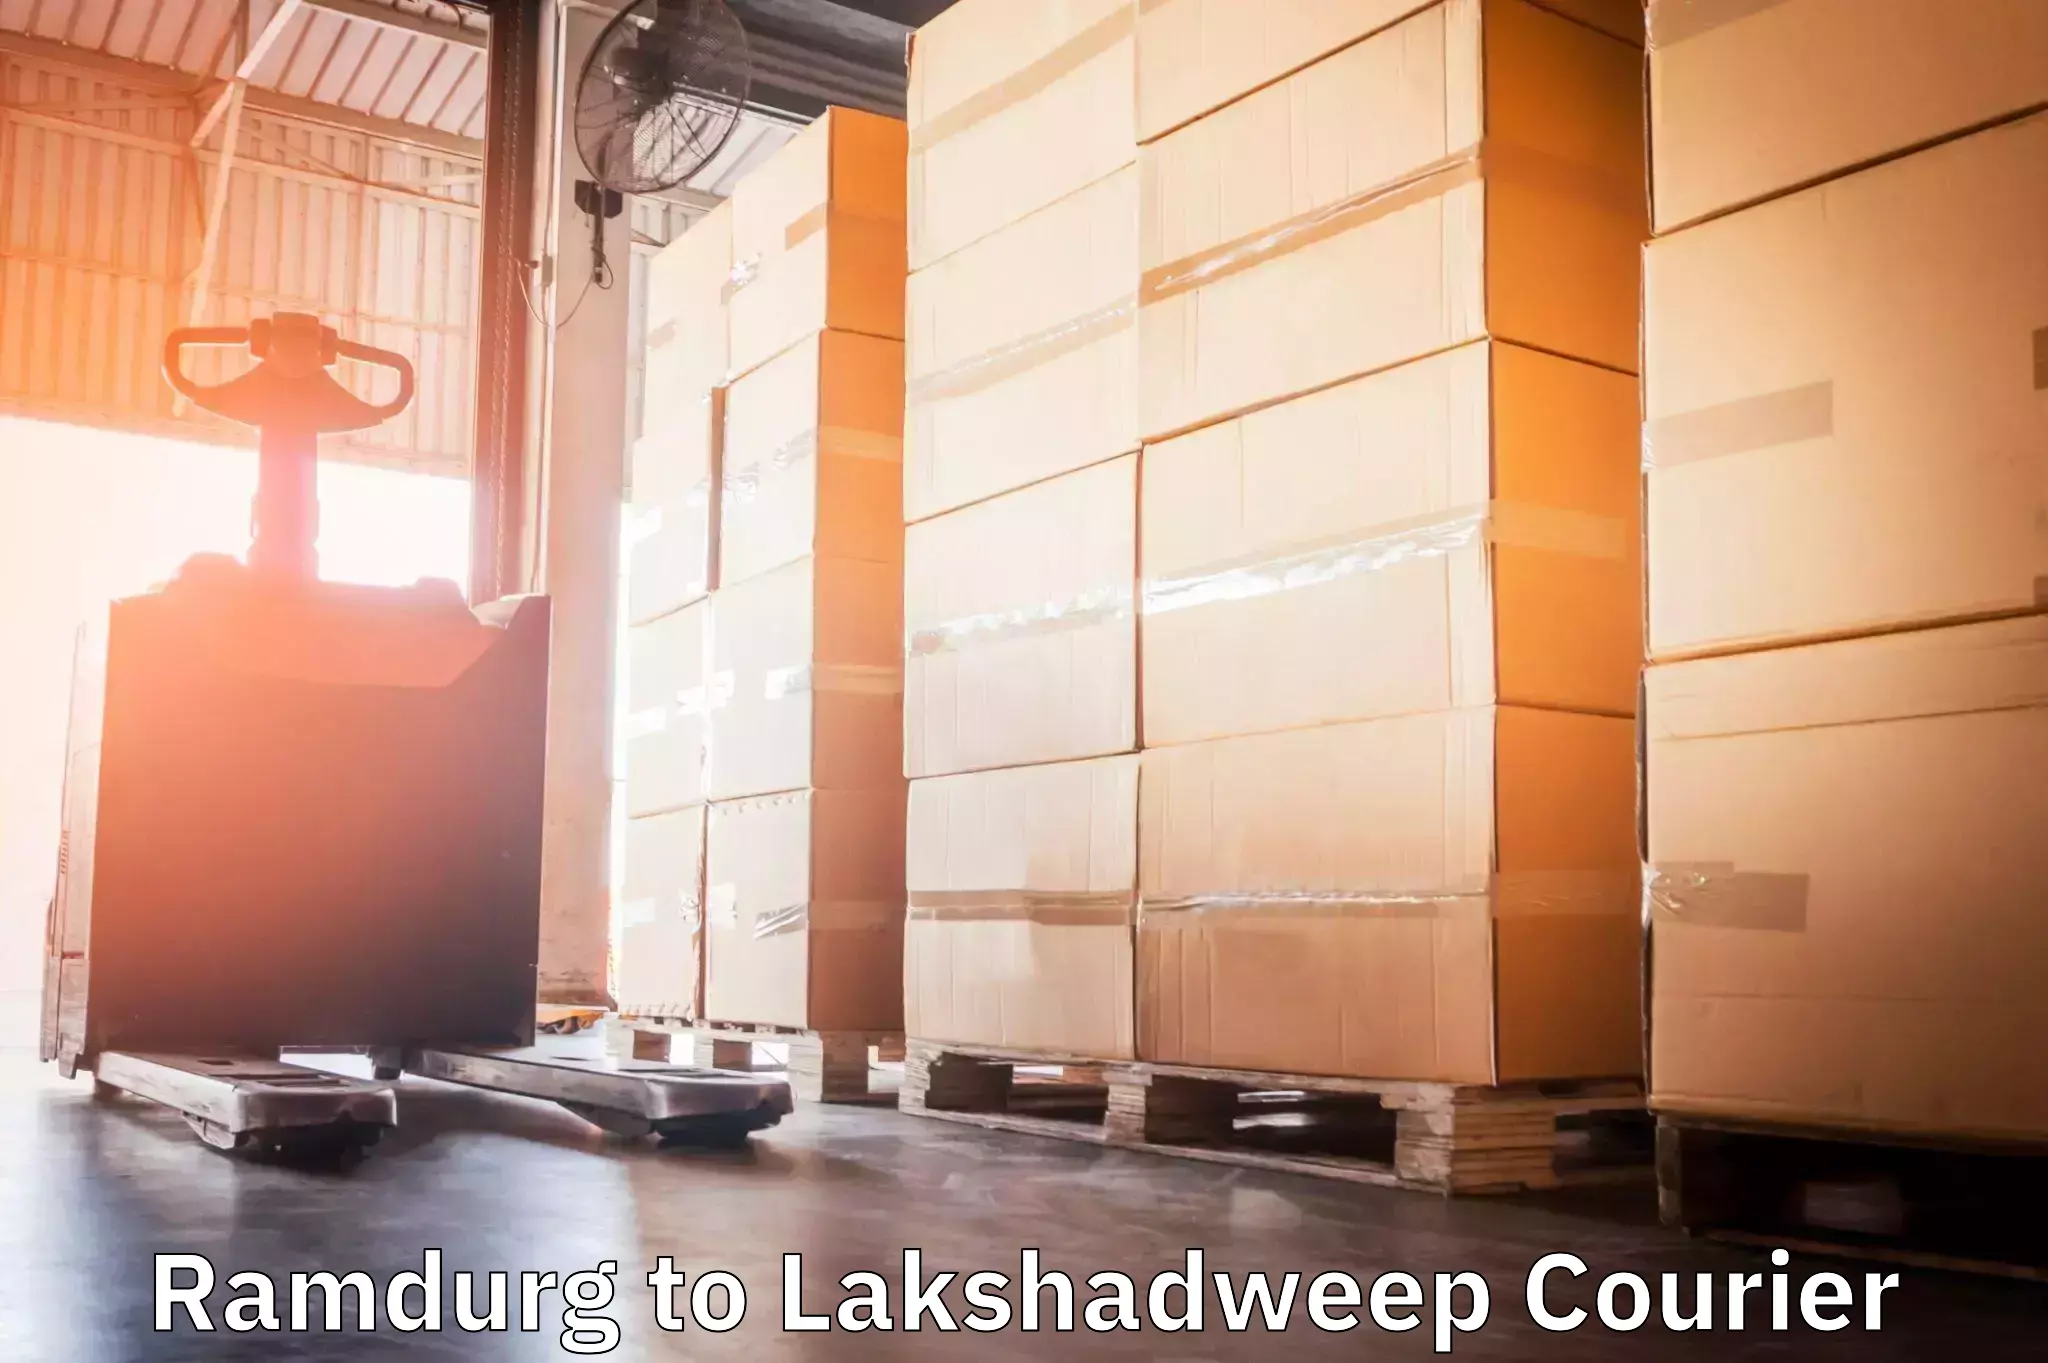 Parcel service for businesses Ramdurg to Lakshadweep